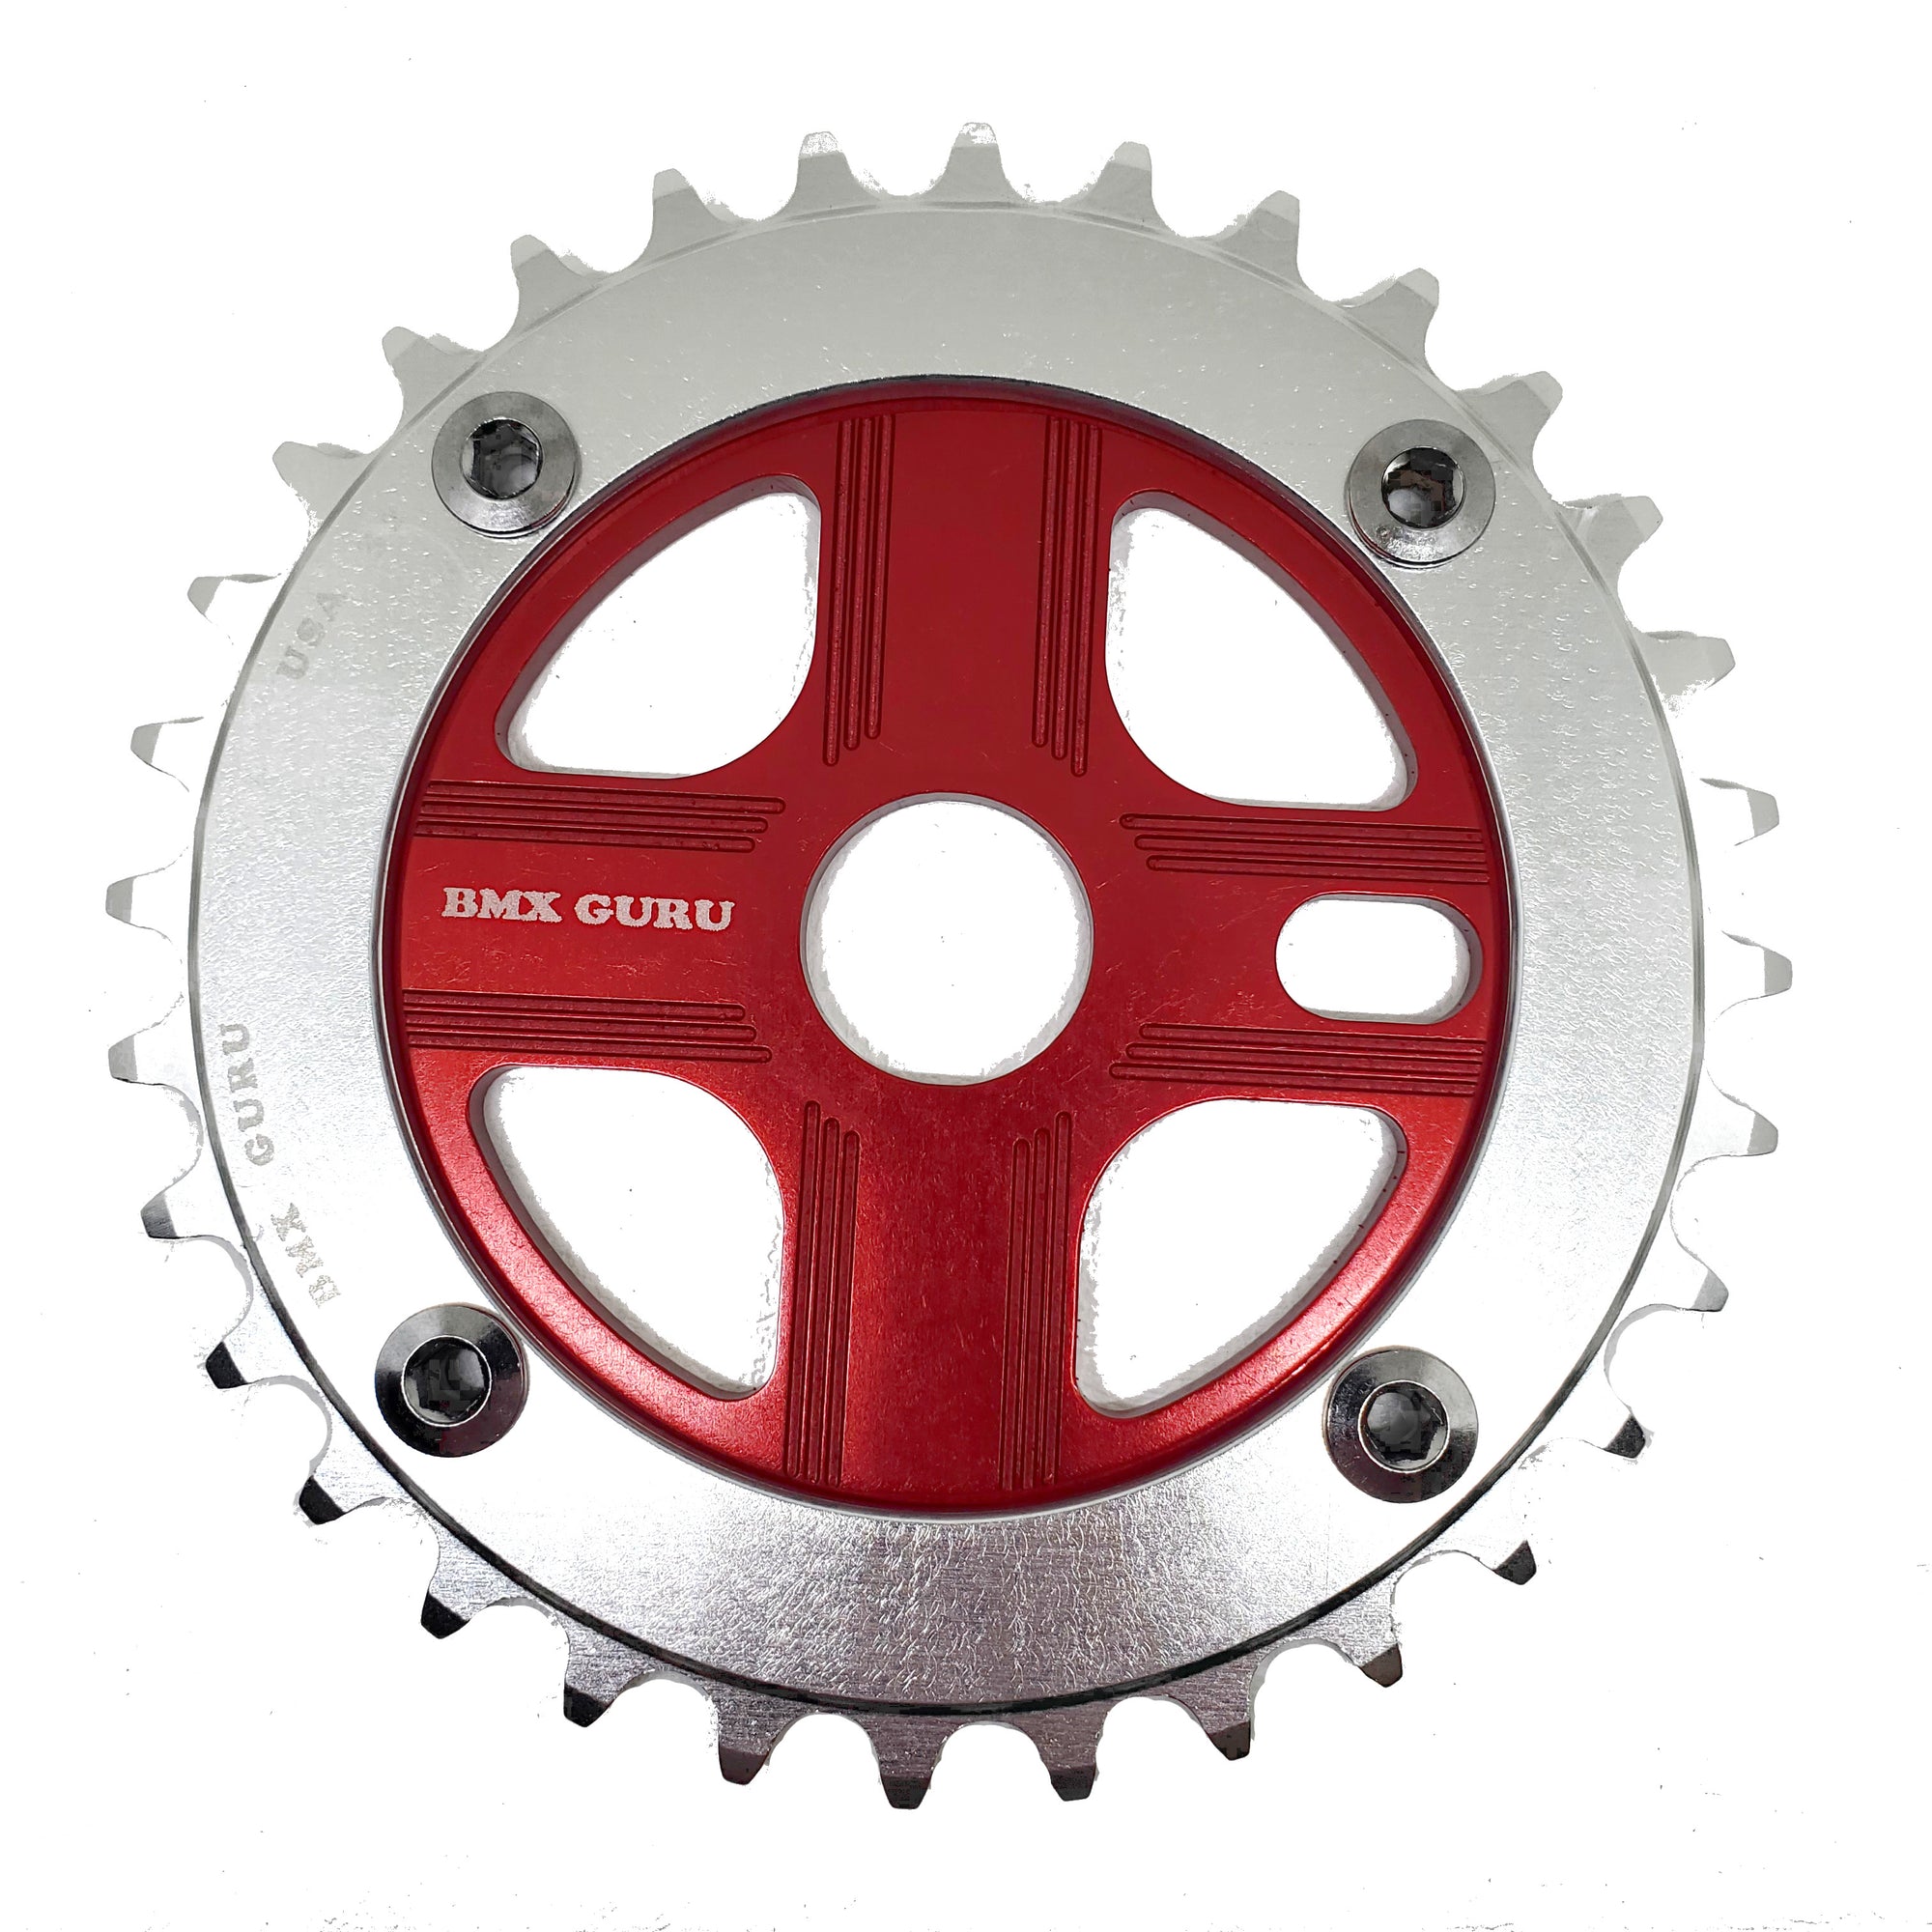 BMXGuru 32T Aluminum Spider & 4-bolt Chainring Combo - Silver over Red - USA Made